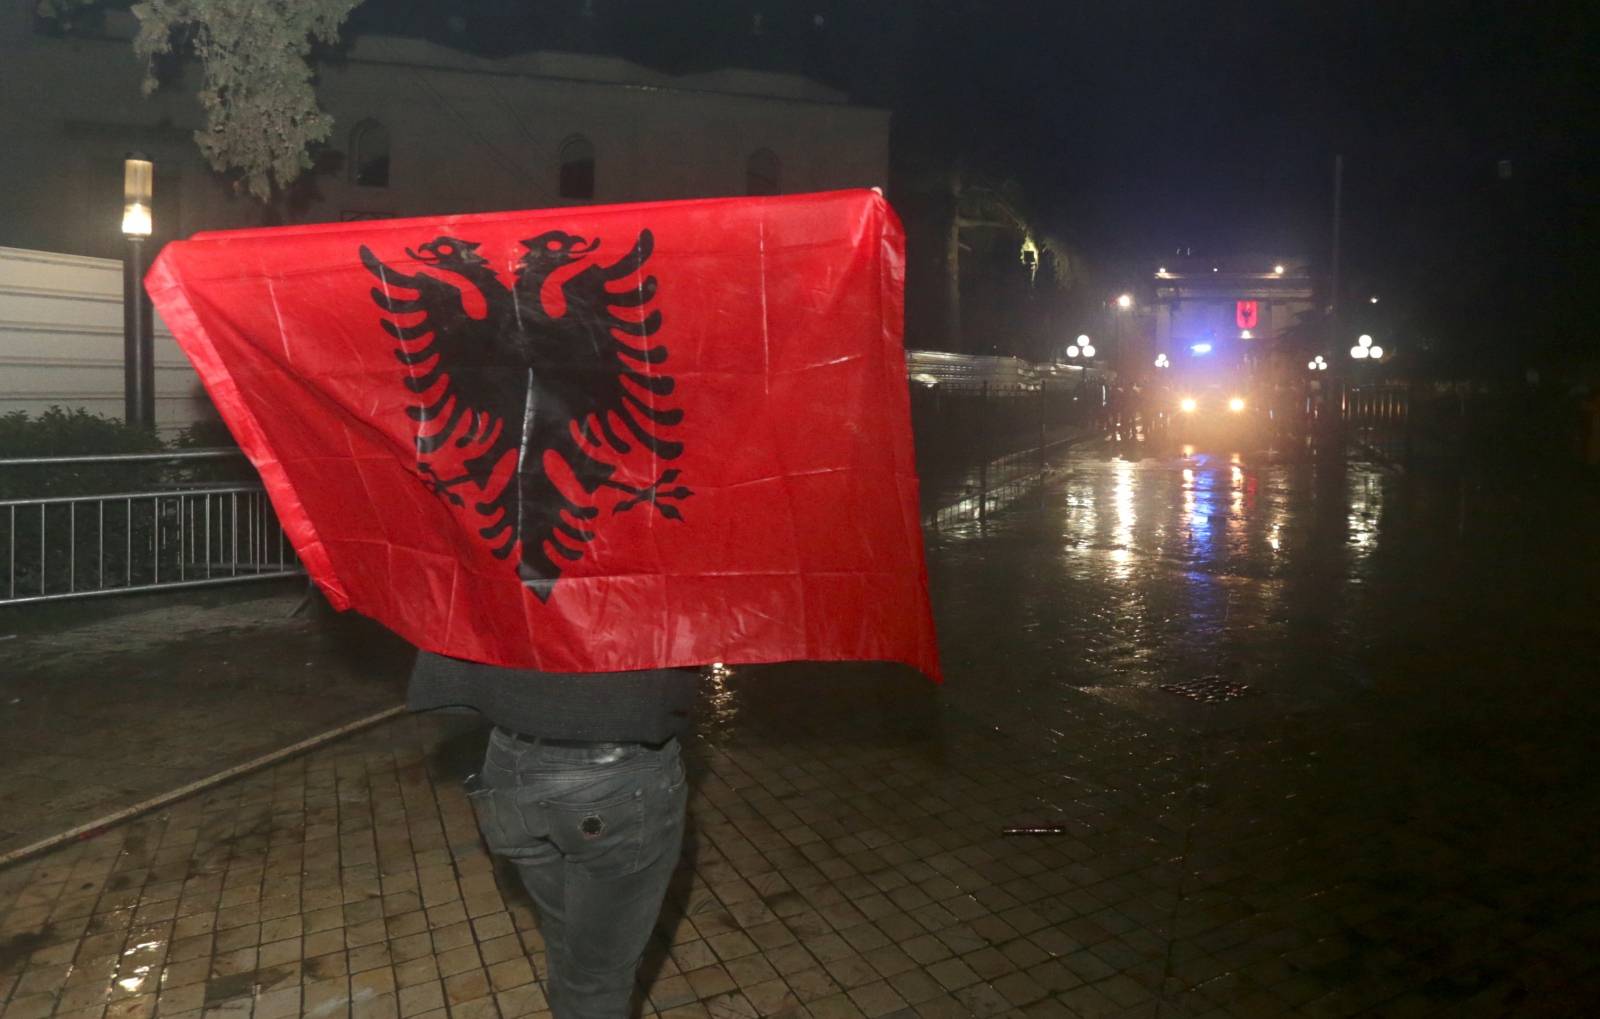 A supporter of the opposition party carries an Albanian flag as he attends an anti-government protest in front of the Parliament Building in Tirana